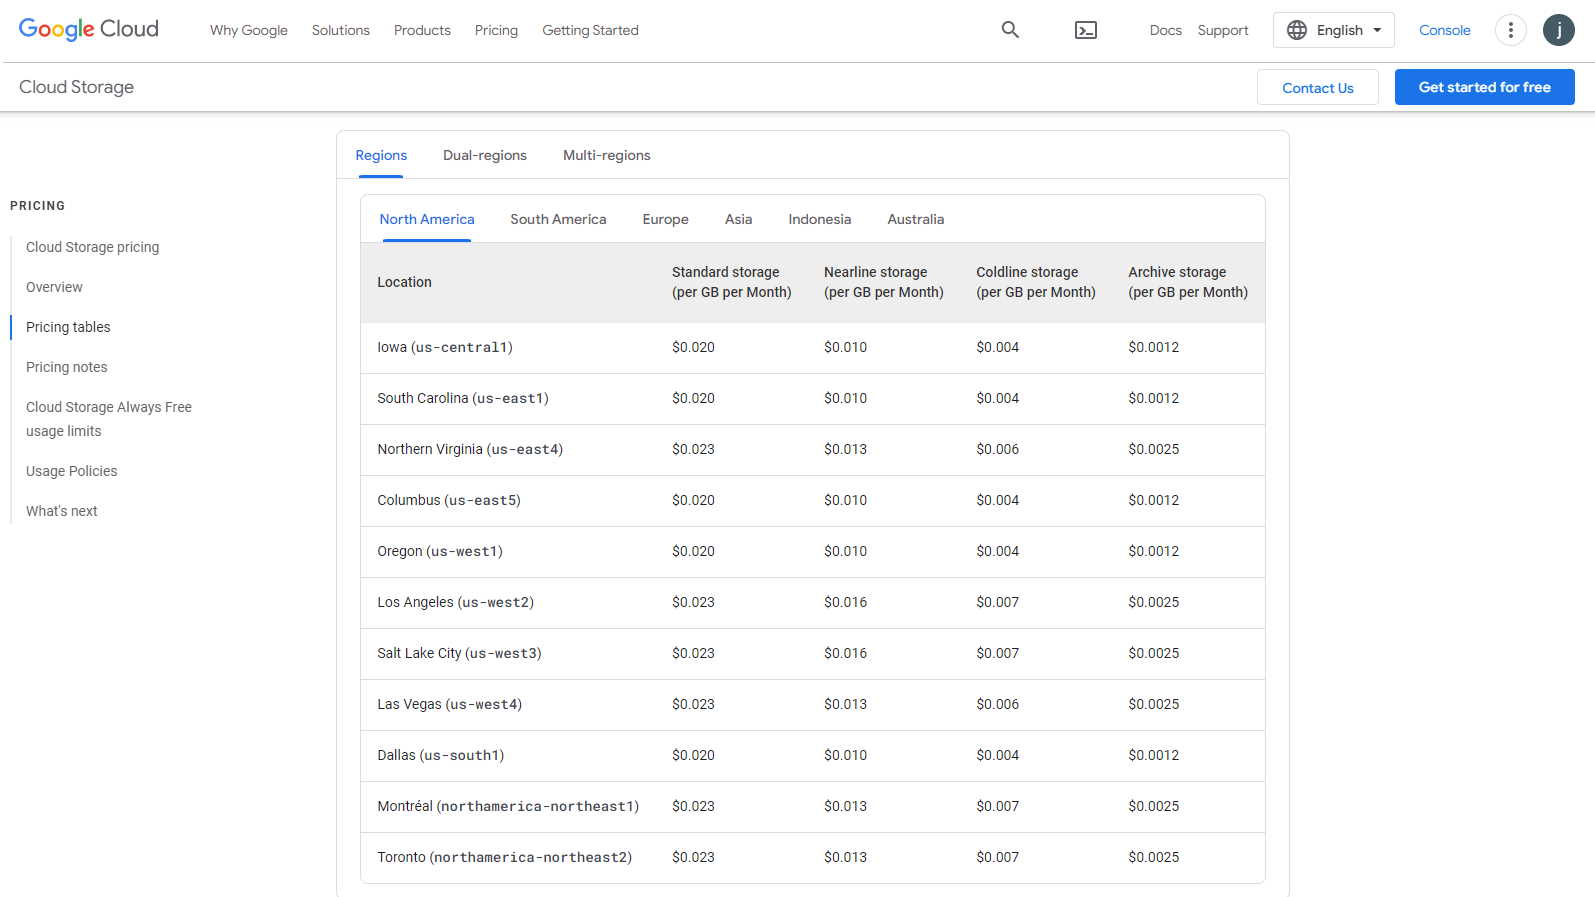 Google Object Cloud Storage pricing